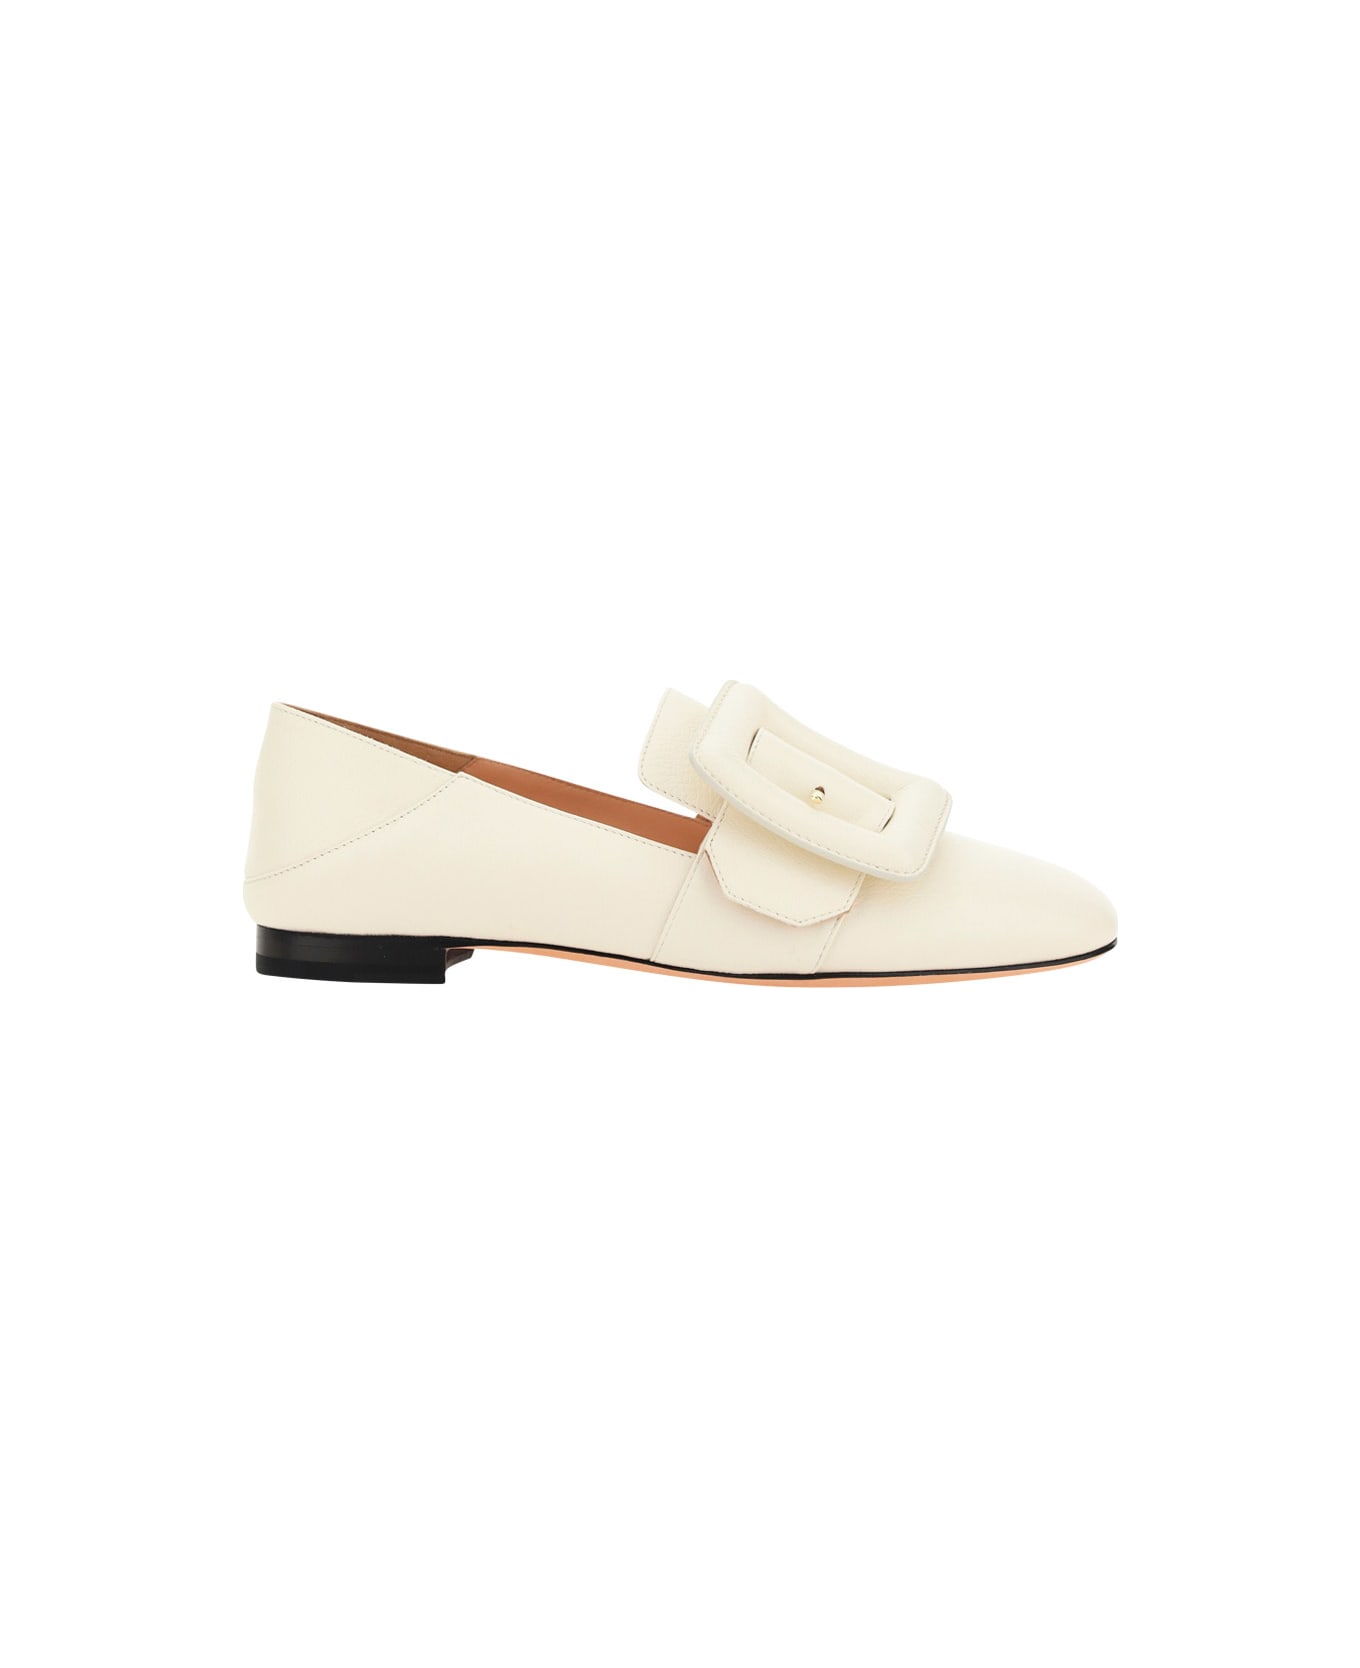 Bally Janelle Puffy Loafers - Beige